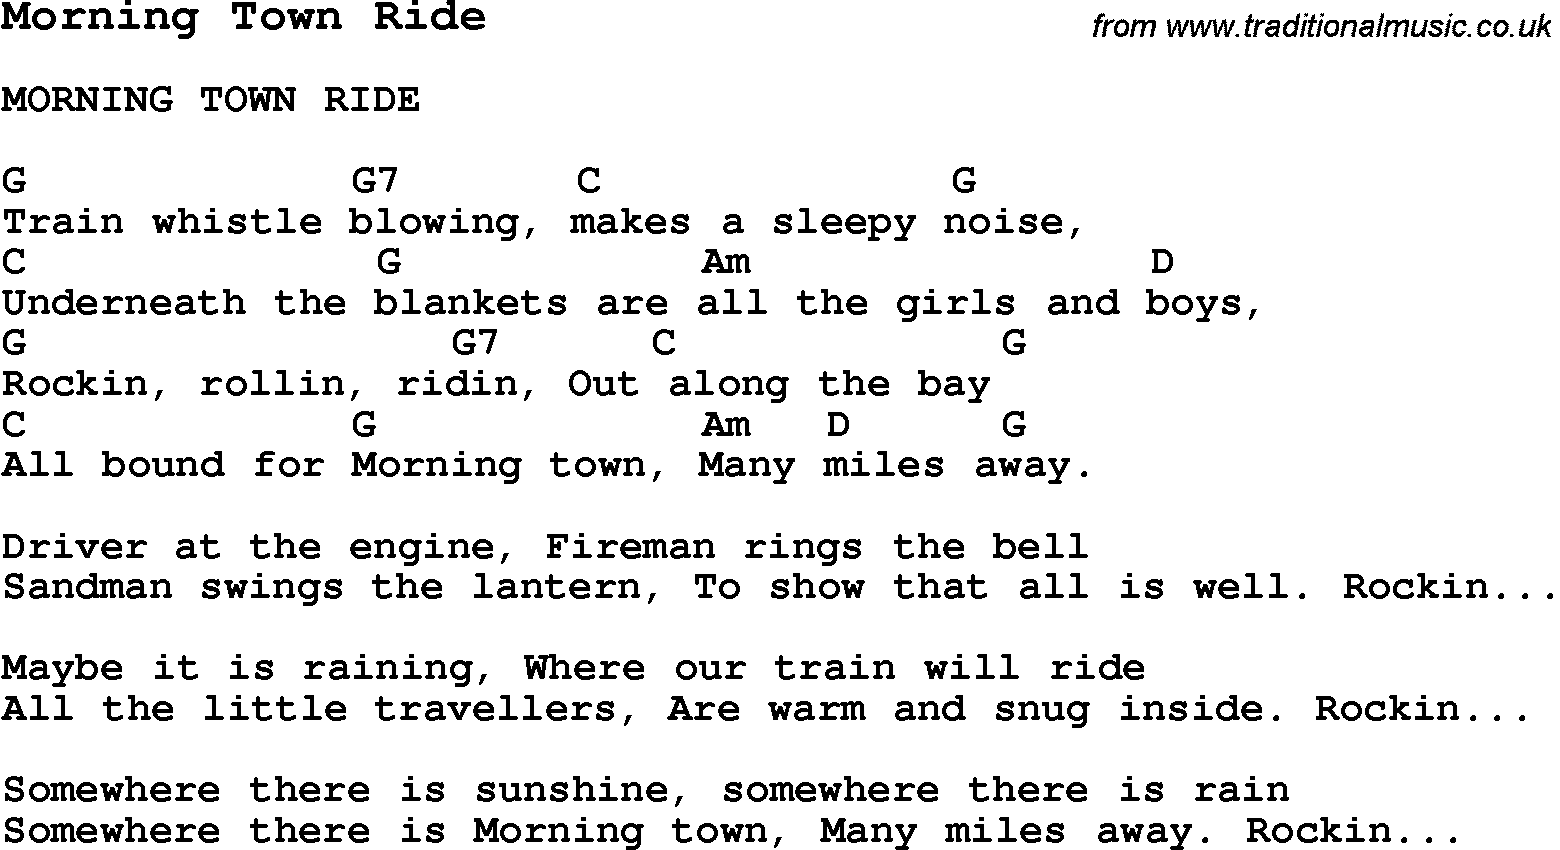 Summer-Camp Song, Morning Town Ride, with lyrics and chords for Ukulele, Guitar Banjo etc.